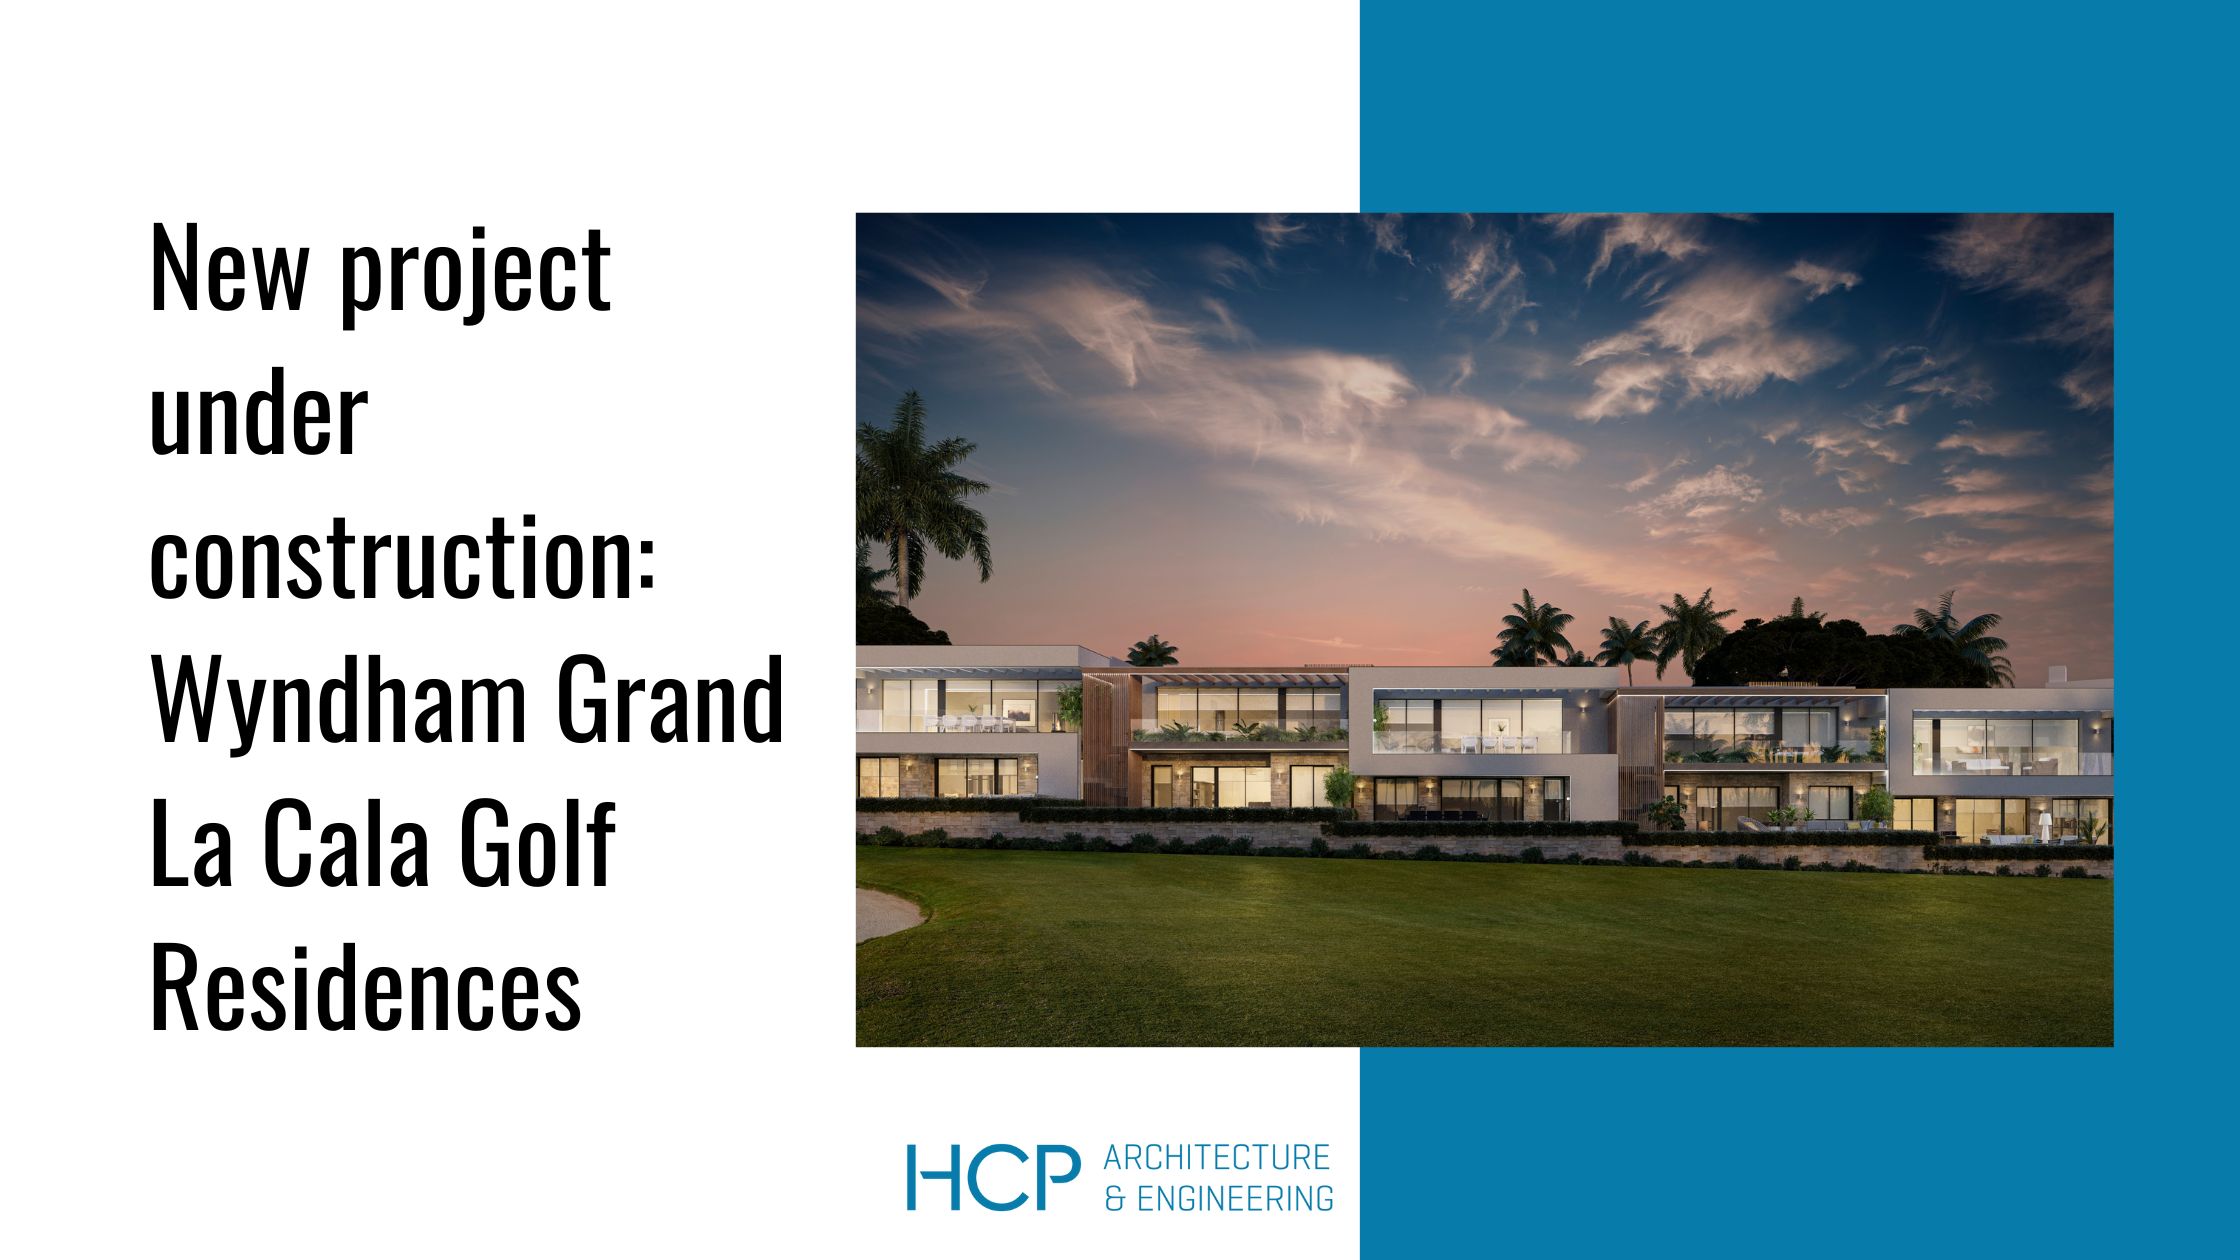 New residential architecture project under construction by HCP: Wyndham Grand La Cala Golf Residences